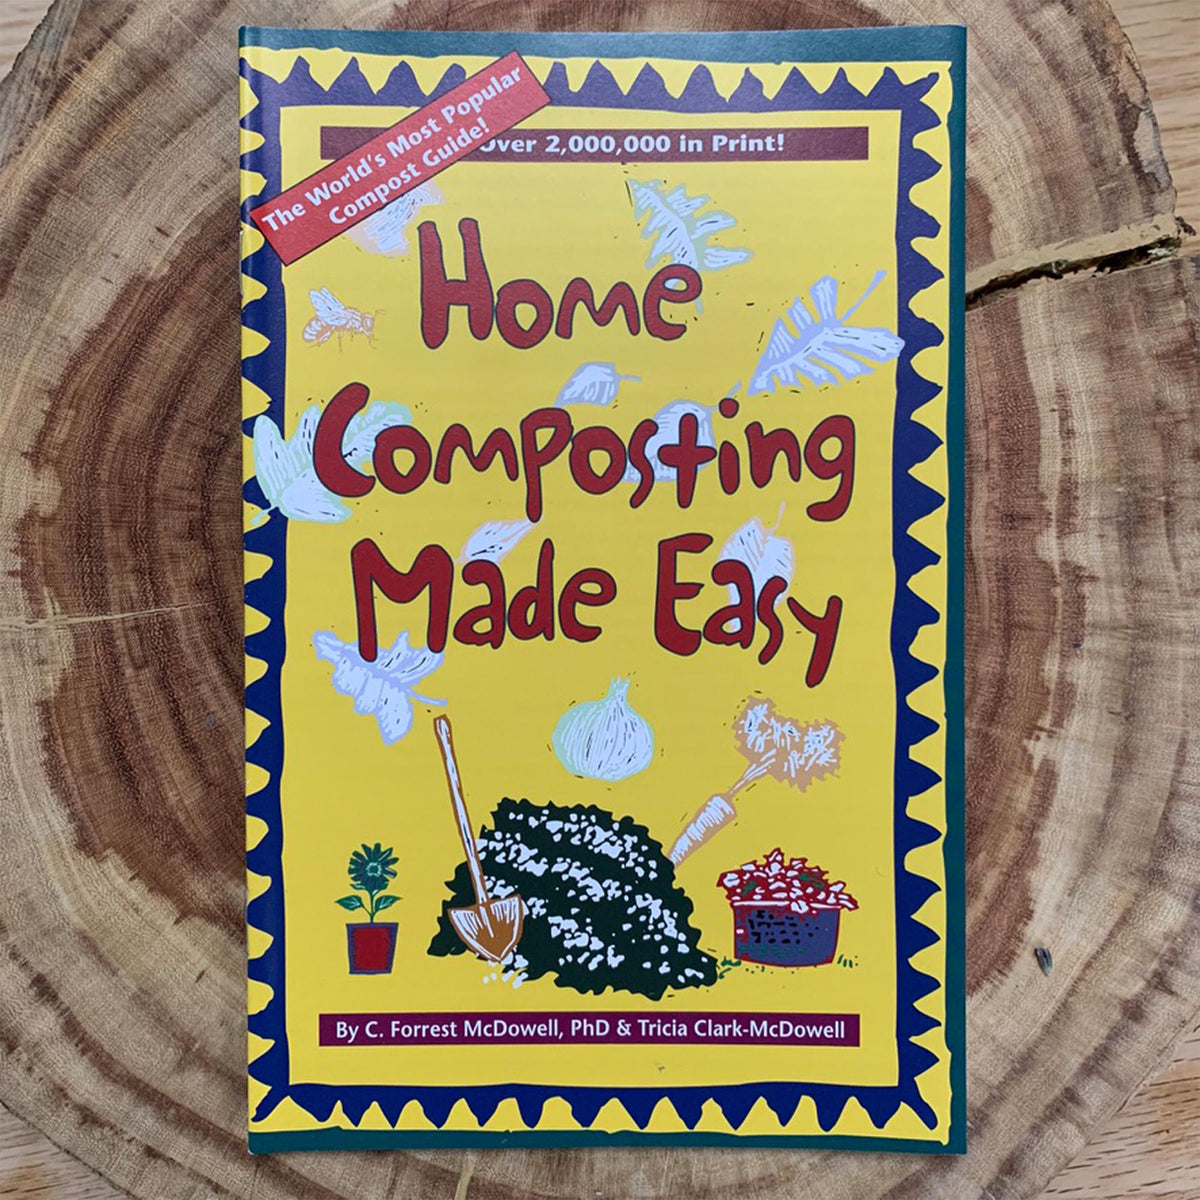 The worlds most popular compost guide, Home Composting made easy. By C.Forrest McDowell &amp; Tricia Clark-McDowell Paperback 31 pages.